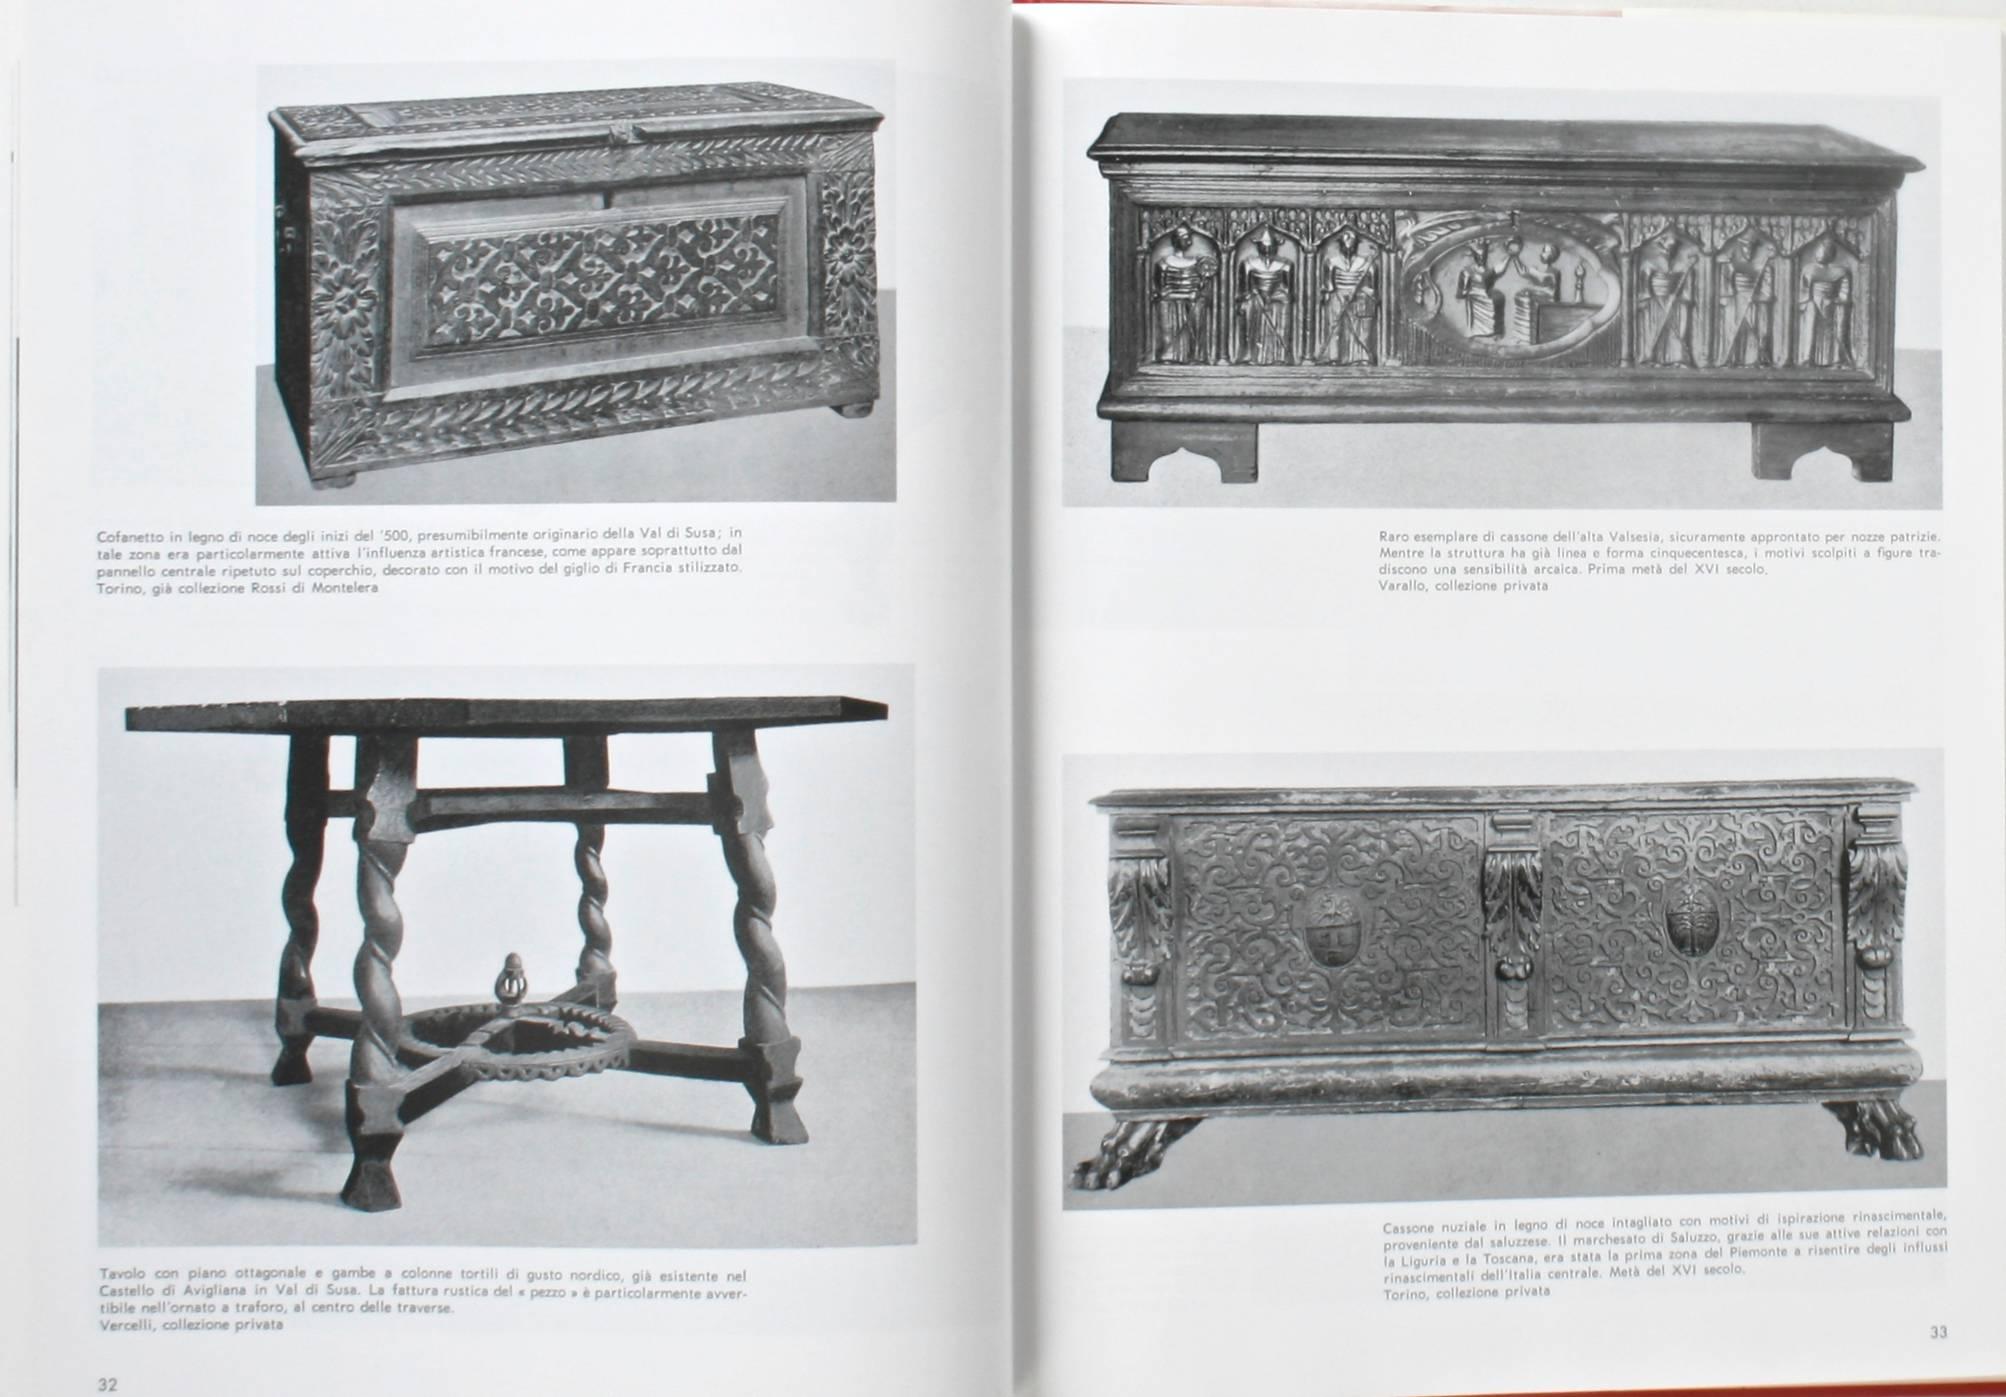 Il Mobile Piemontese (Piedmontese Furniture.) Milan: Görlich Editore, 1997. First edition hardcover with dust jacket. 204 pp. Italian text. A beautiful book on the history of carved Piedmont furniture and design with 16 full page color plates and